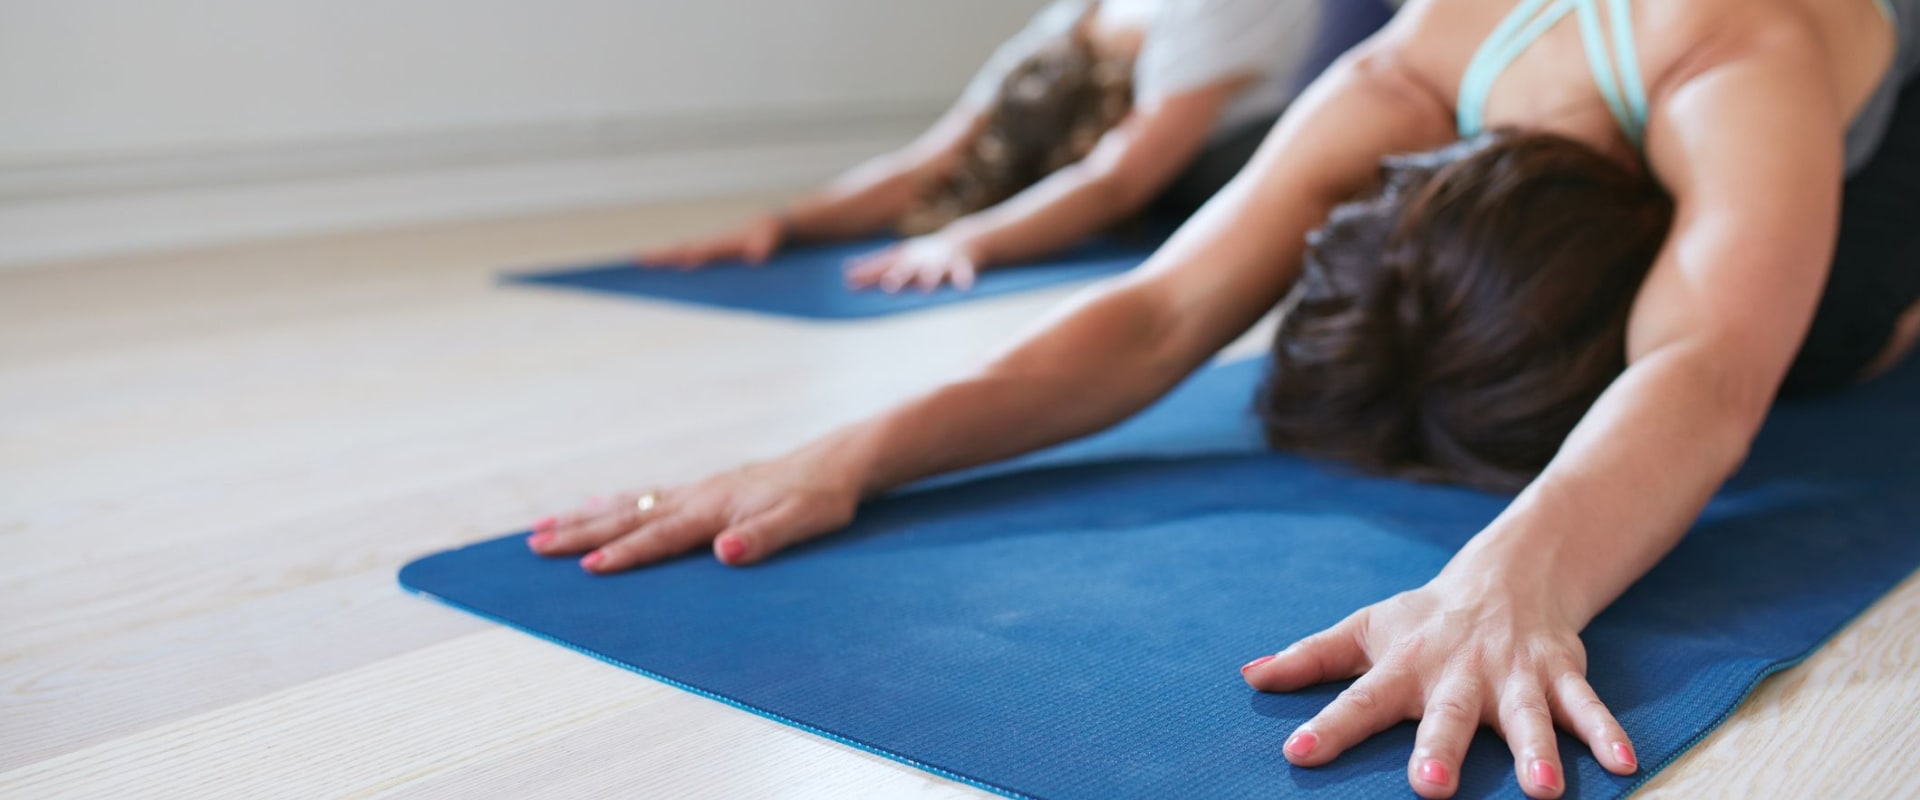 Who benefits the most from yoga?